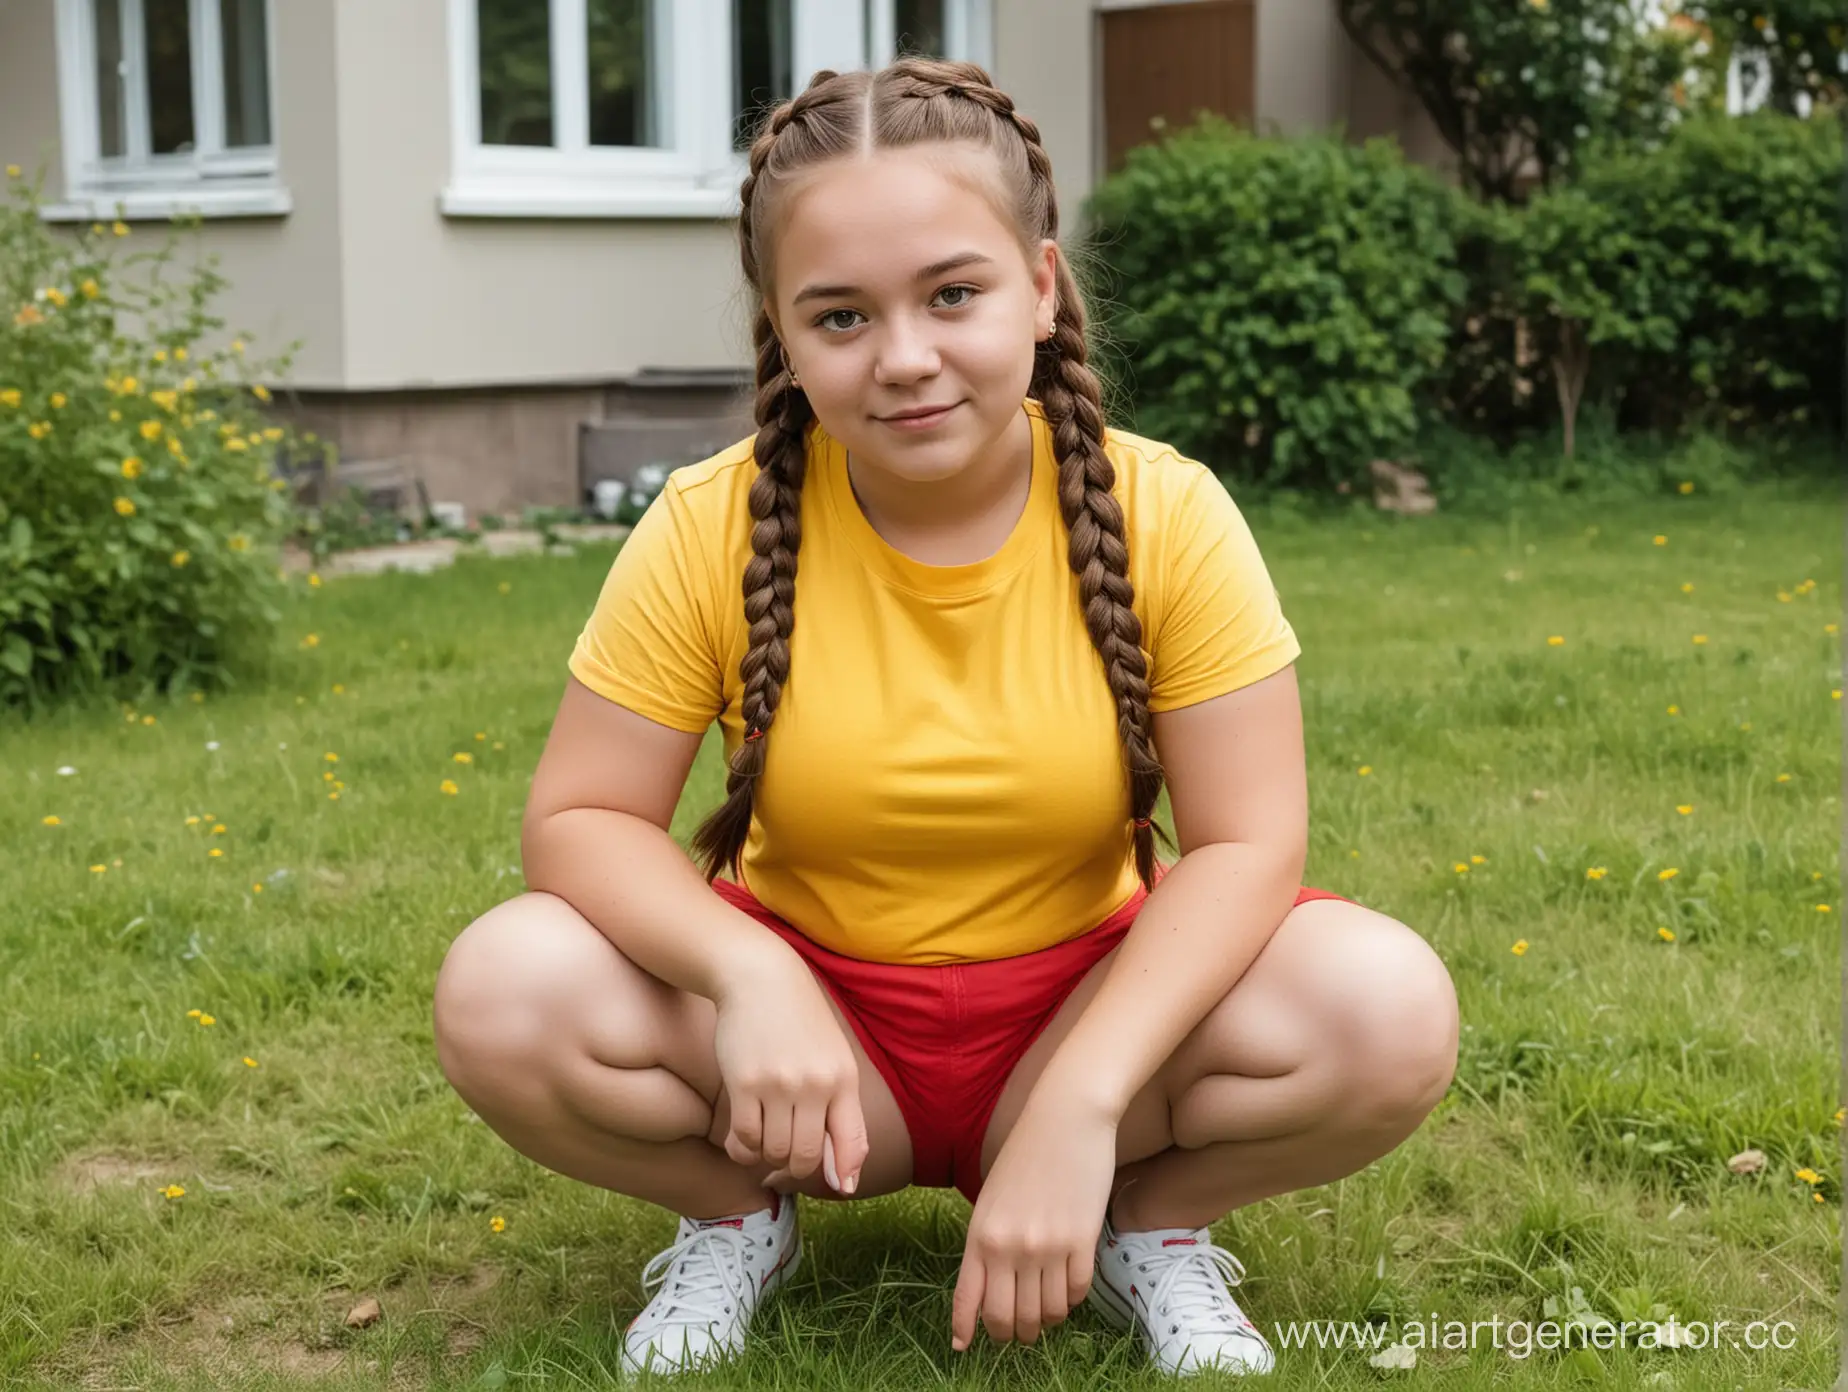 Charming-Overweight-Girl-with-Braids-Squatting-on-Lawn